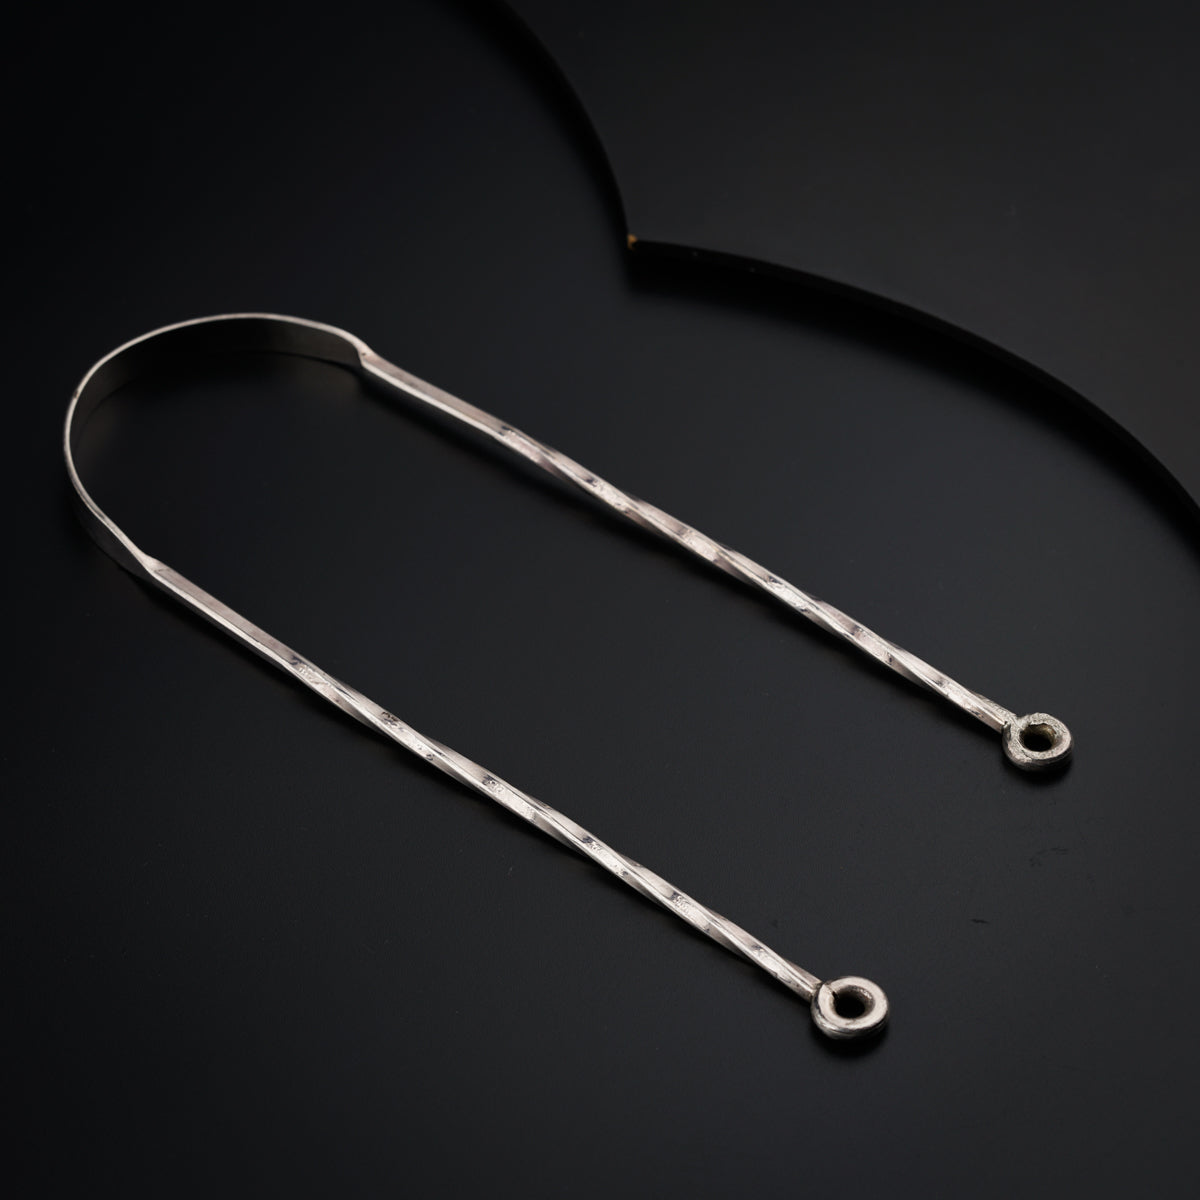 a pair of metal hair clips on a black surface